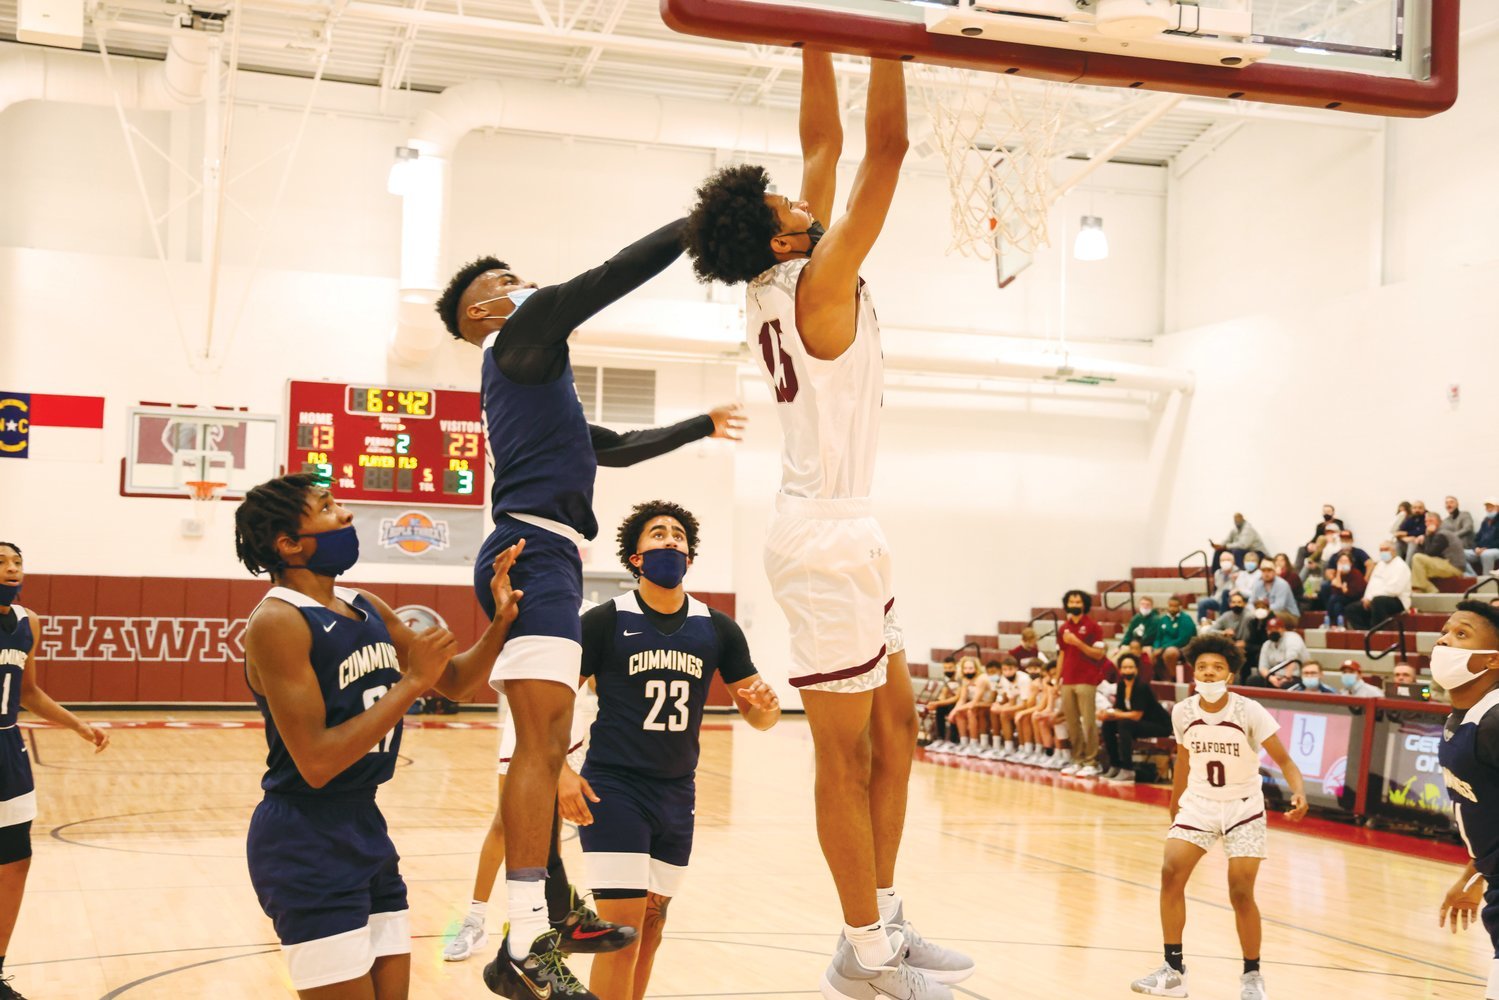 Seaforth sophomore Jarin Stevenson dunks the ball in the Hawks' 87-62 loss to the Cummings Cavaliers on Dec. 14.